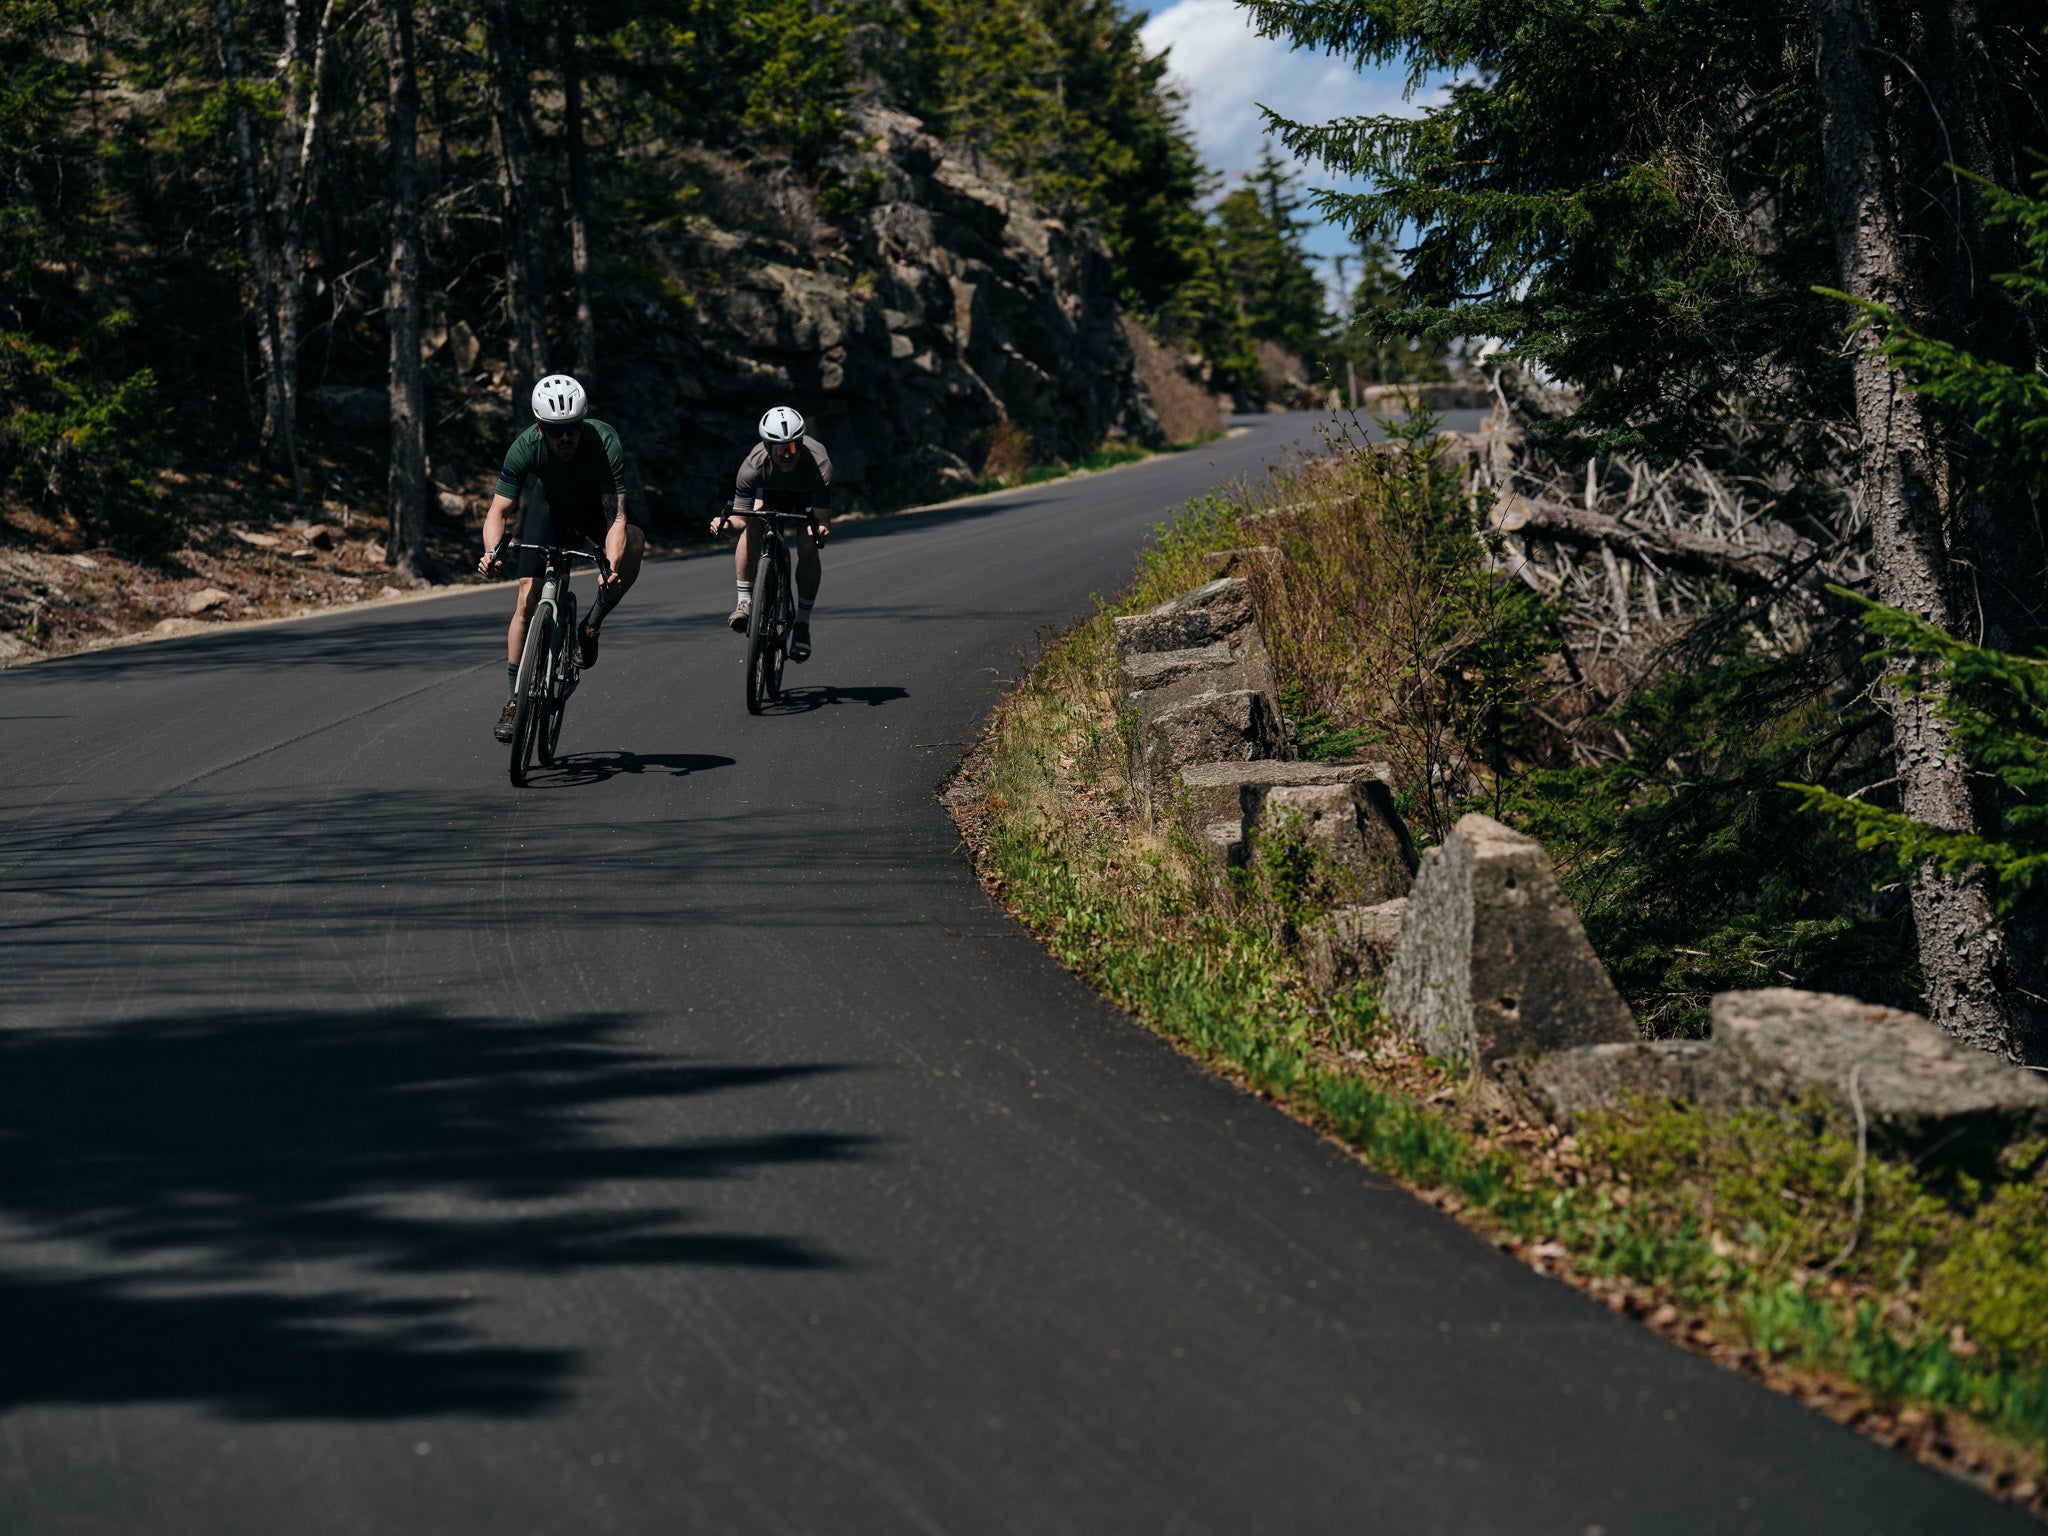 Two cyclists riding down a road towards the camera in Acadia National Park in Pinebury Rangeley Short Sleeve Merino Wool Cycling Jerseys.